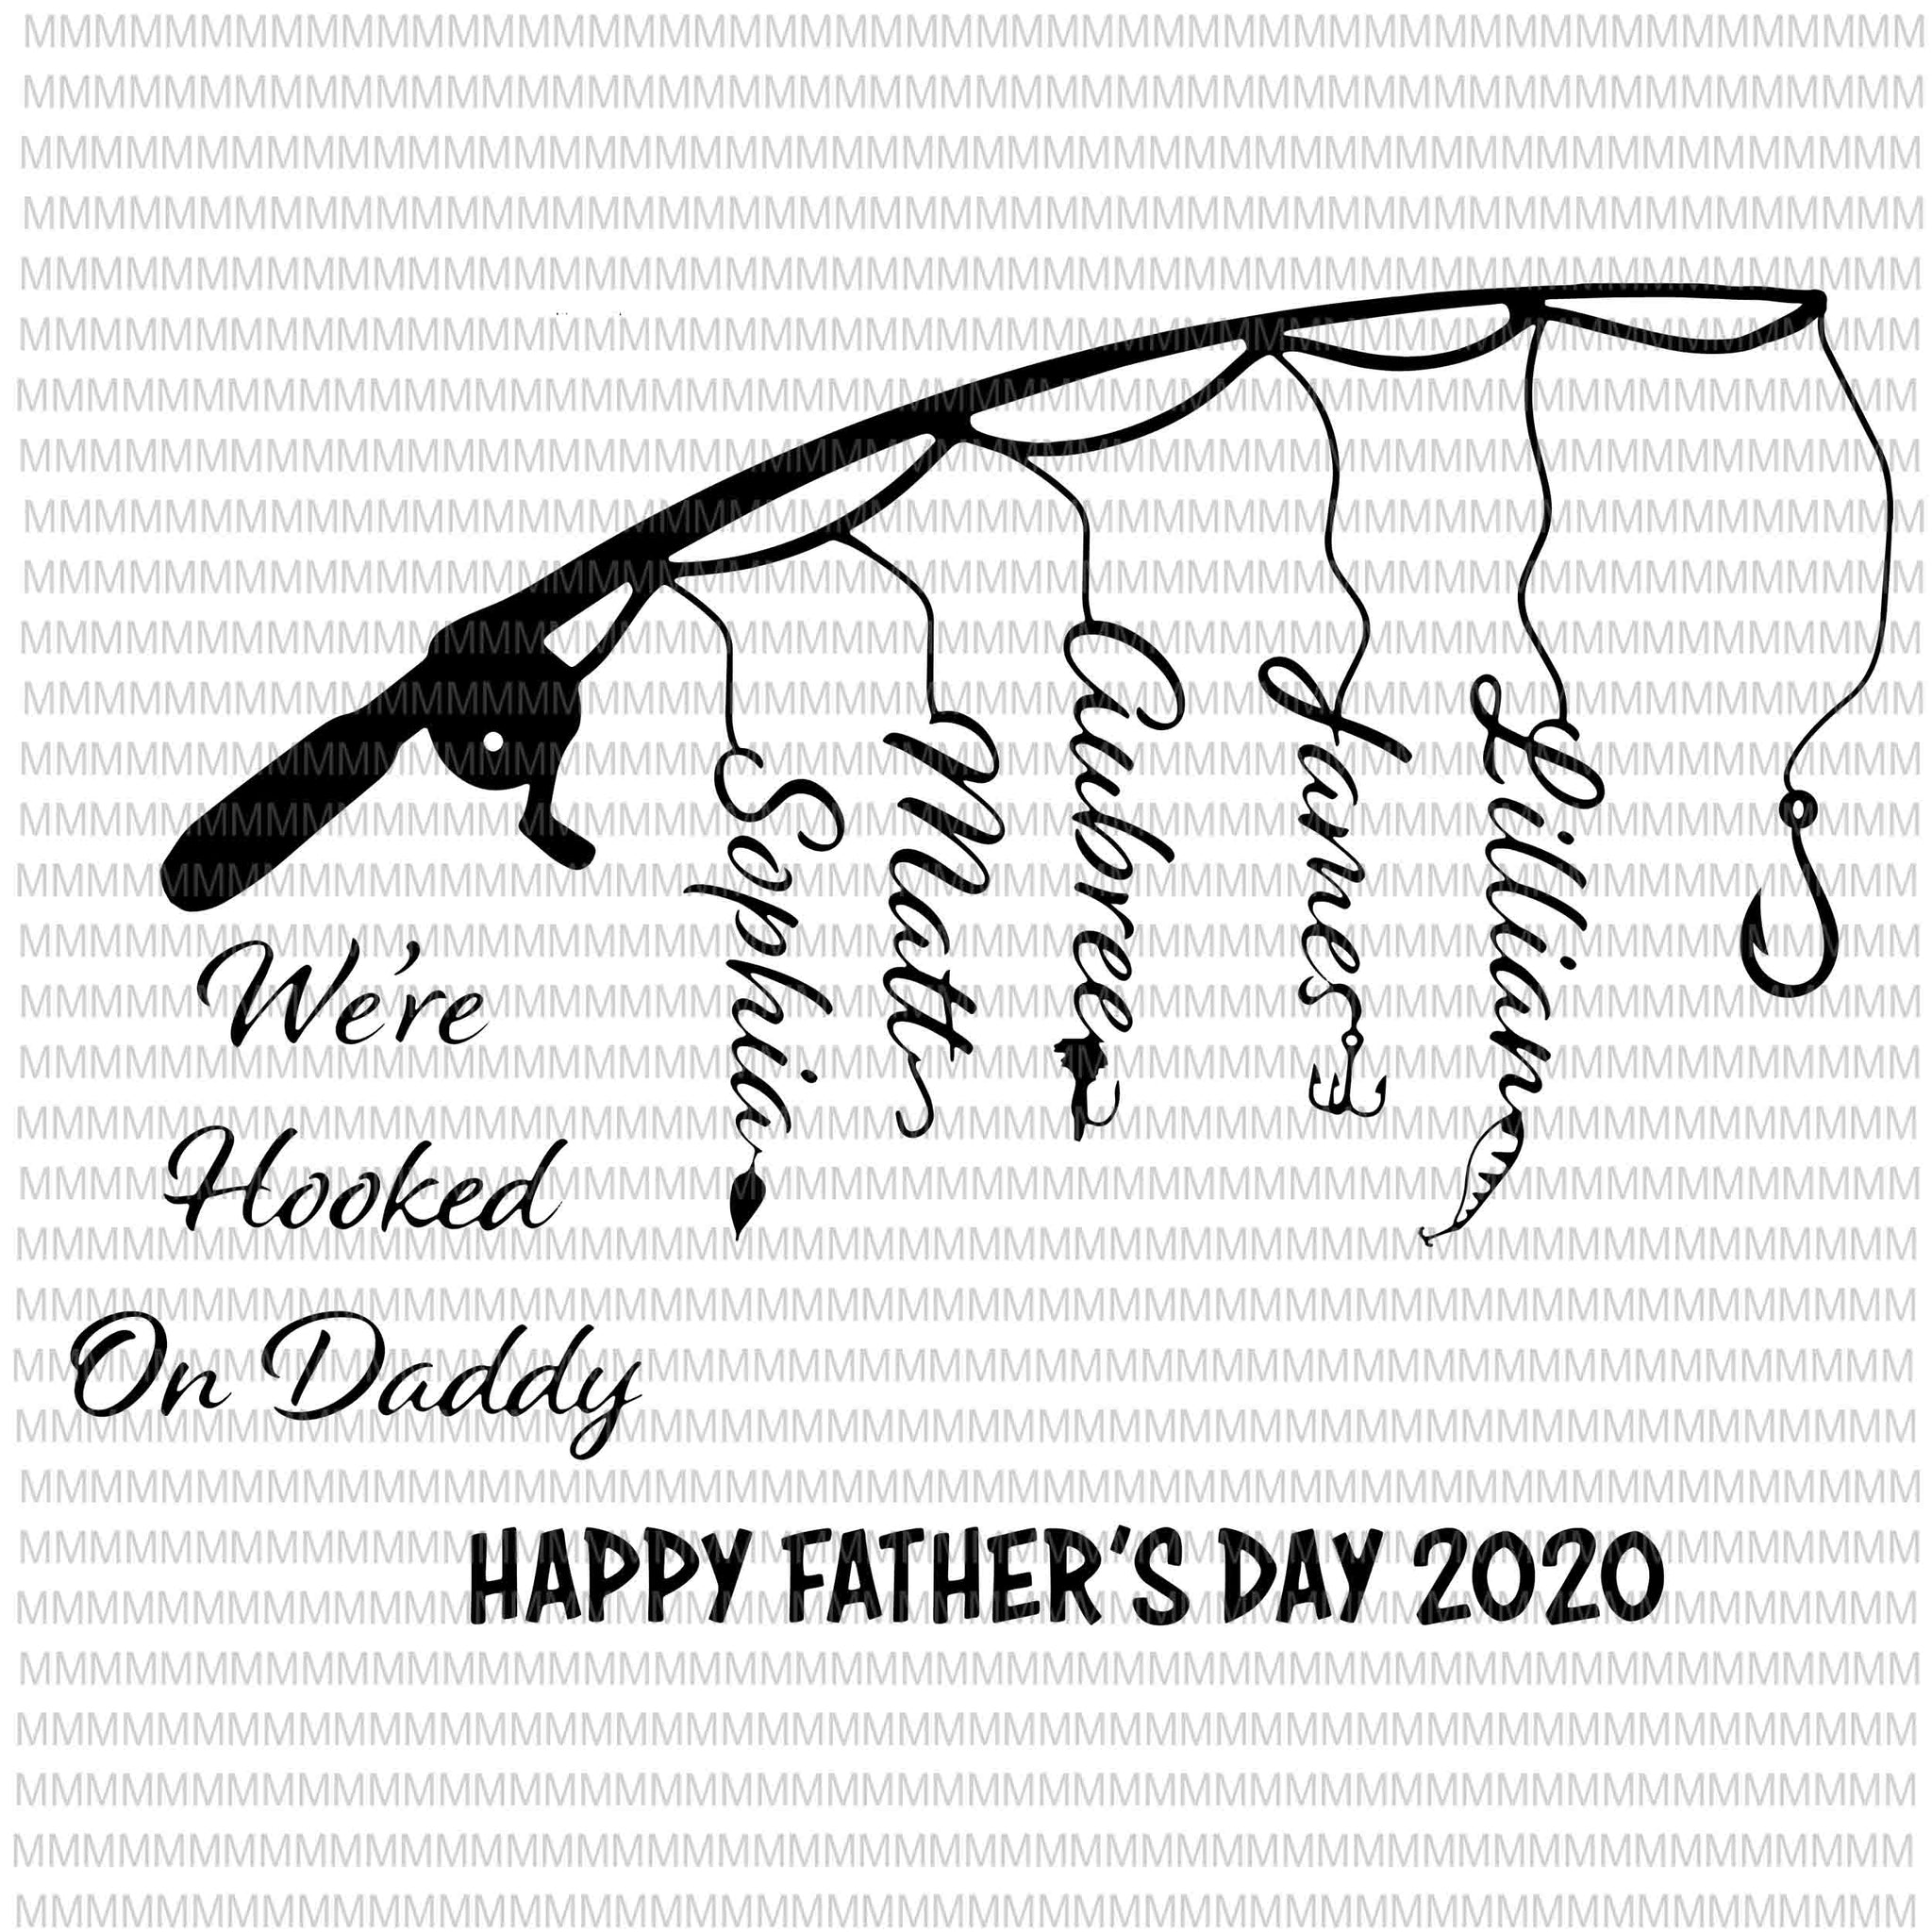 We're hooked on daddy, fishing father's day svg, happy father's day 2020 svg, png, dxf, eps, ai files commercial use t-shirt design